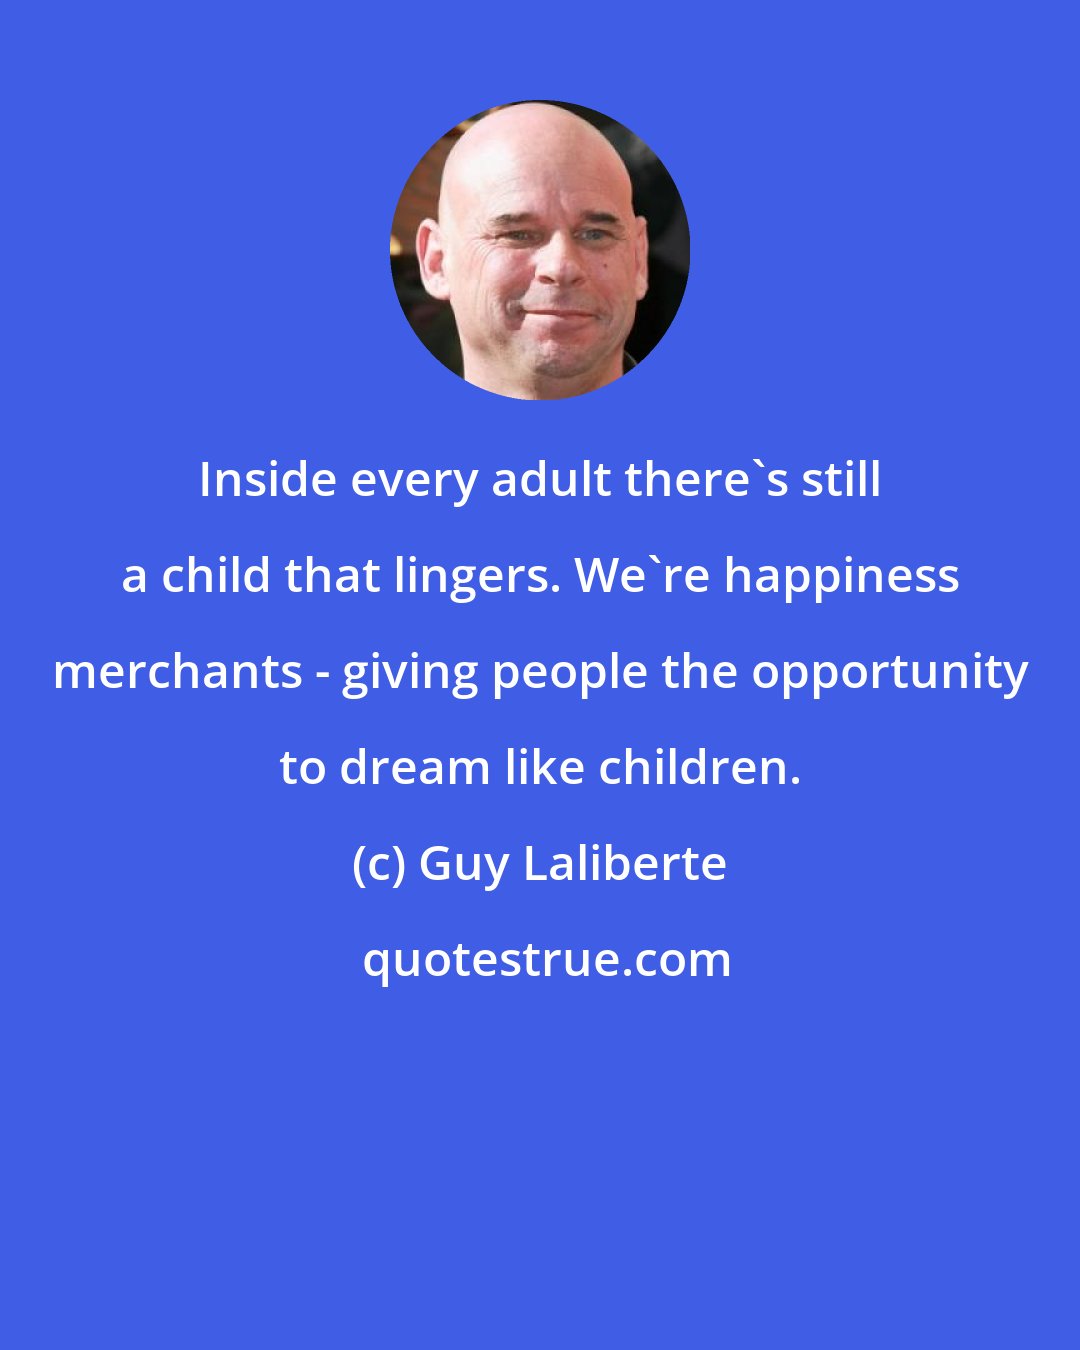 Guy Laliberte: Inside every adult there's still a child that lingers. We're happiness merchants - giving people the opportunity to dream like children.